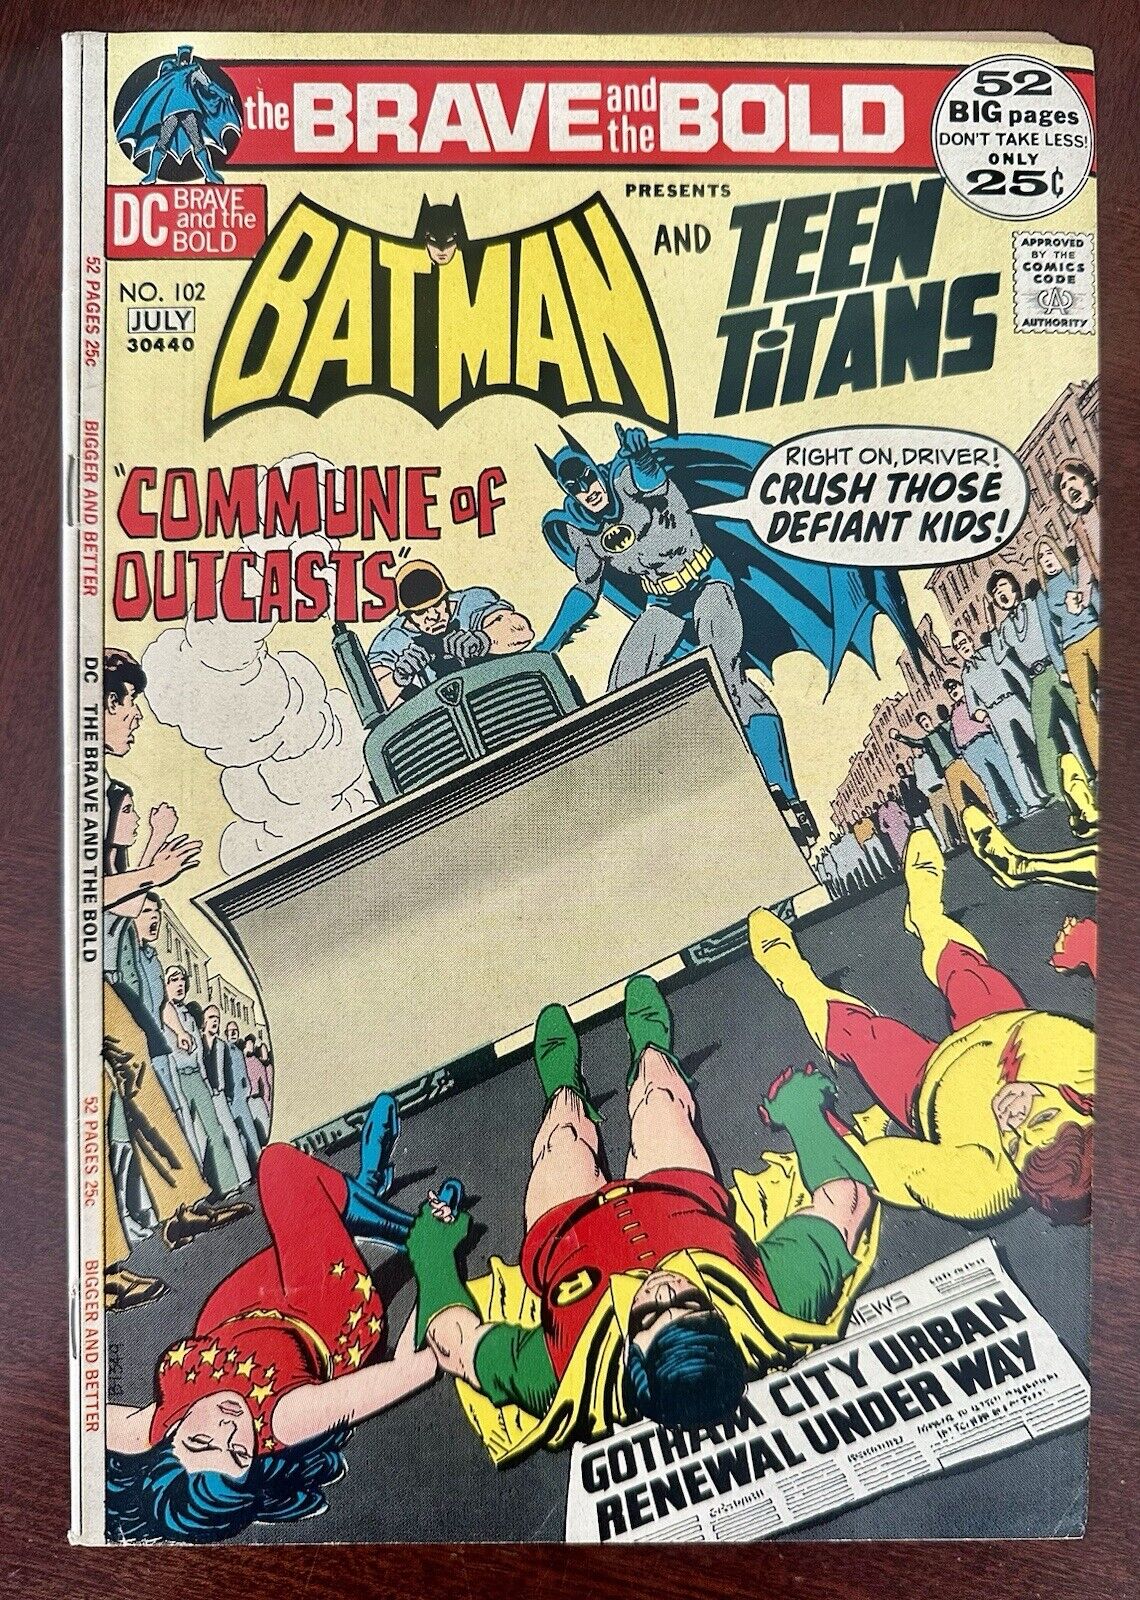 1971 Brave and the Bold #102 - Batman and Teen Titans